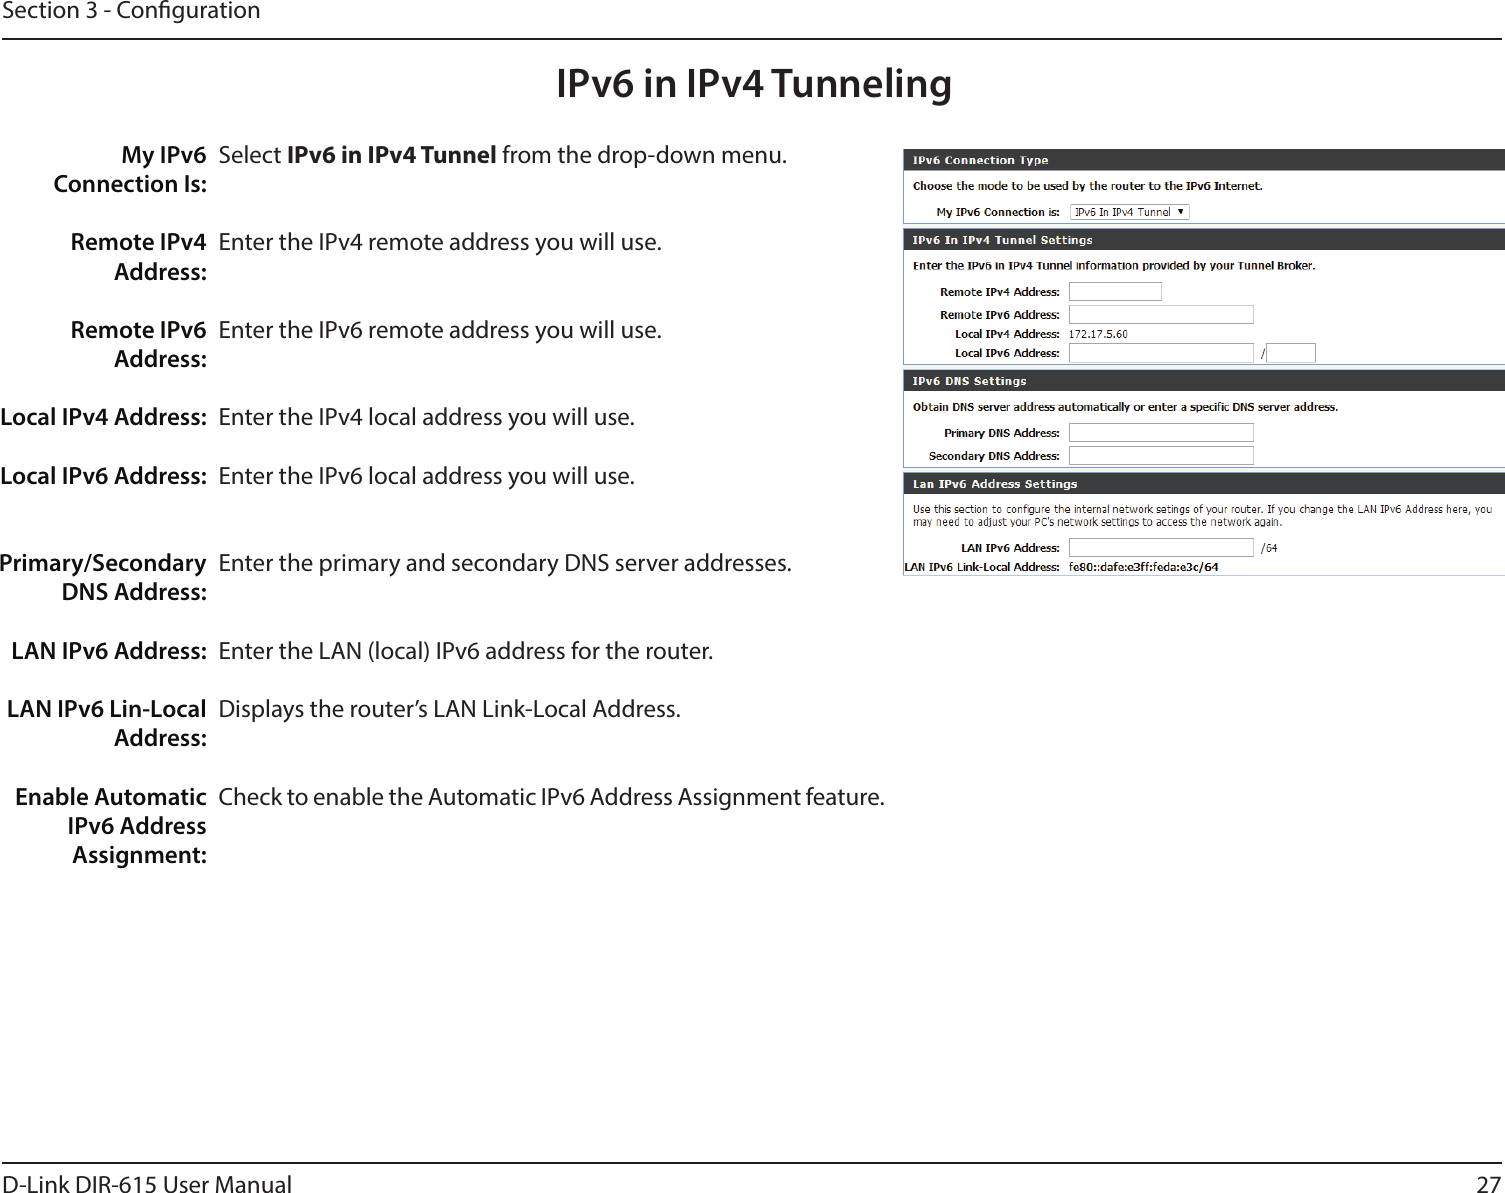 27D-Link DIR-615 User ManualSection 3 - CongurationIPv6 in IPv4 TunnelingSelect IPv6 in IPv4 Tunnel from the drop-down menu.Enter the IPv4 remote address you will use.Enter the IPv6 remote address you will use.Enter the IPv4 local address you will use.Enter the IPv6 local address you will use.Enter the primary and secondary DNS server addresses.Enter the LAN (local) IPv6 address for the router. Displays the router’s LAN Link-Local Address.Check to enable the Automatic IPv6 Address Assignment feature.My IPv6 Connection Is:Remote IPv4 Address:Remote IPv6 Address:Local IPv4 Address:Local IPv6 Address:Primary/Secondary DNS Address:LAN IPv6 Address:LAN IPv6 Lin-Local Address:Enable Automatic IPv6 AddressAssignment: